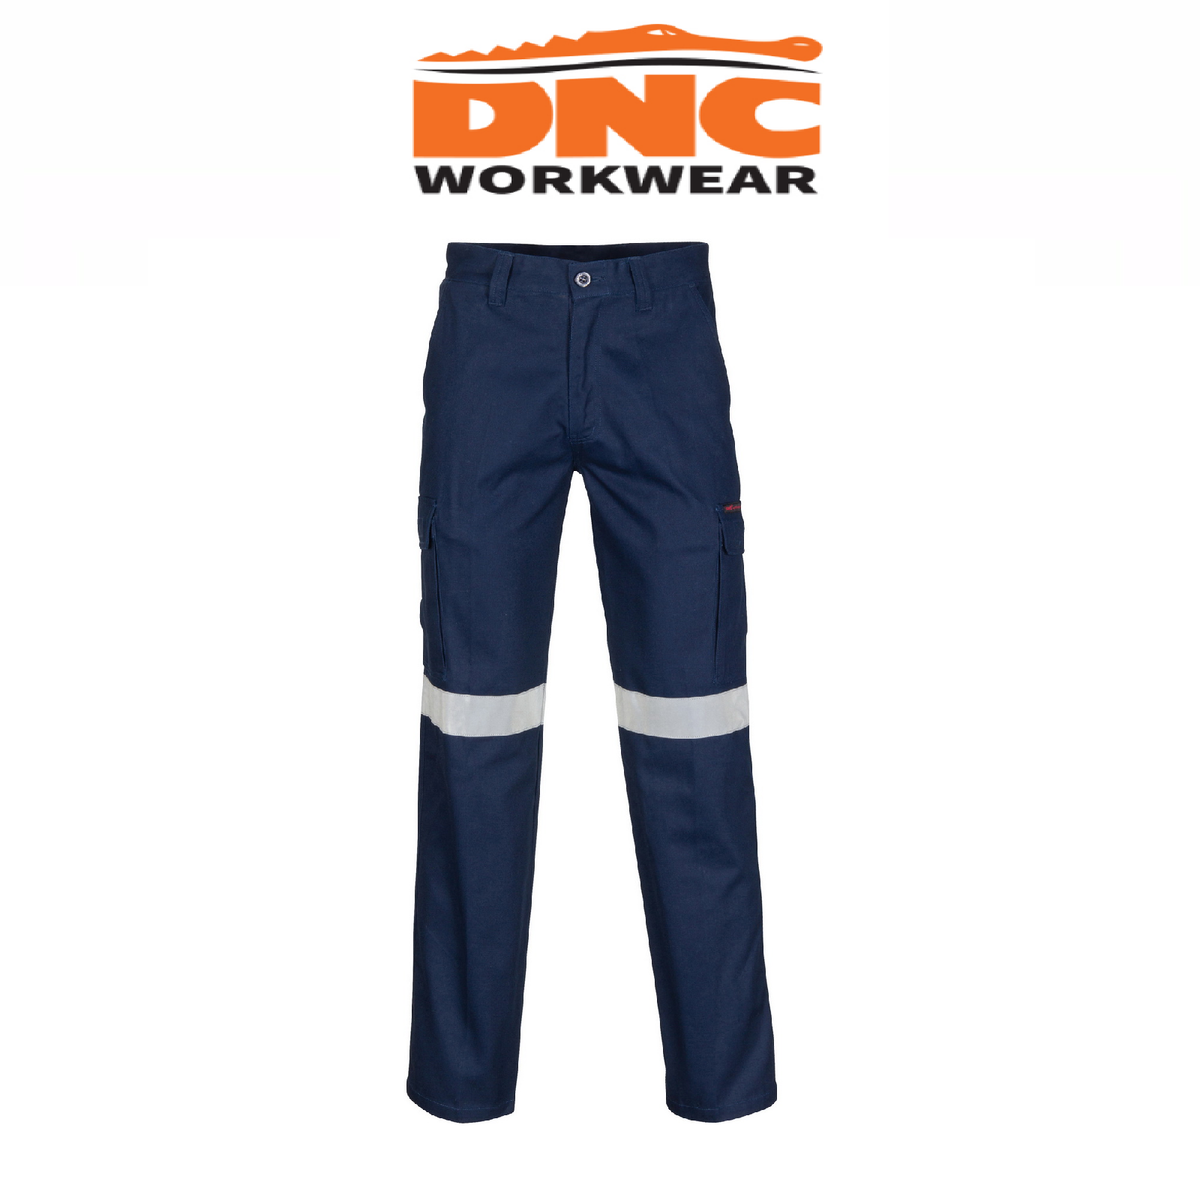 DNC Workwear Mens Middle Weight Cotton Double Angled Cargo Pants Reflective 1504